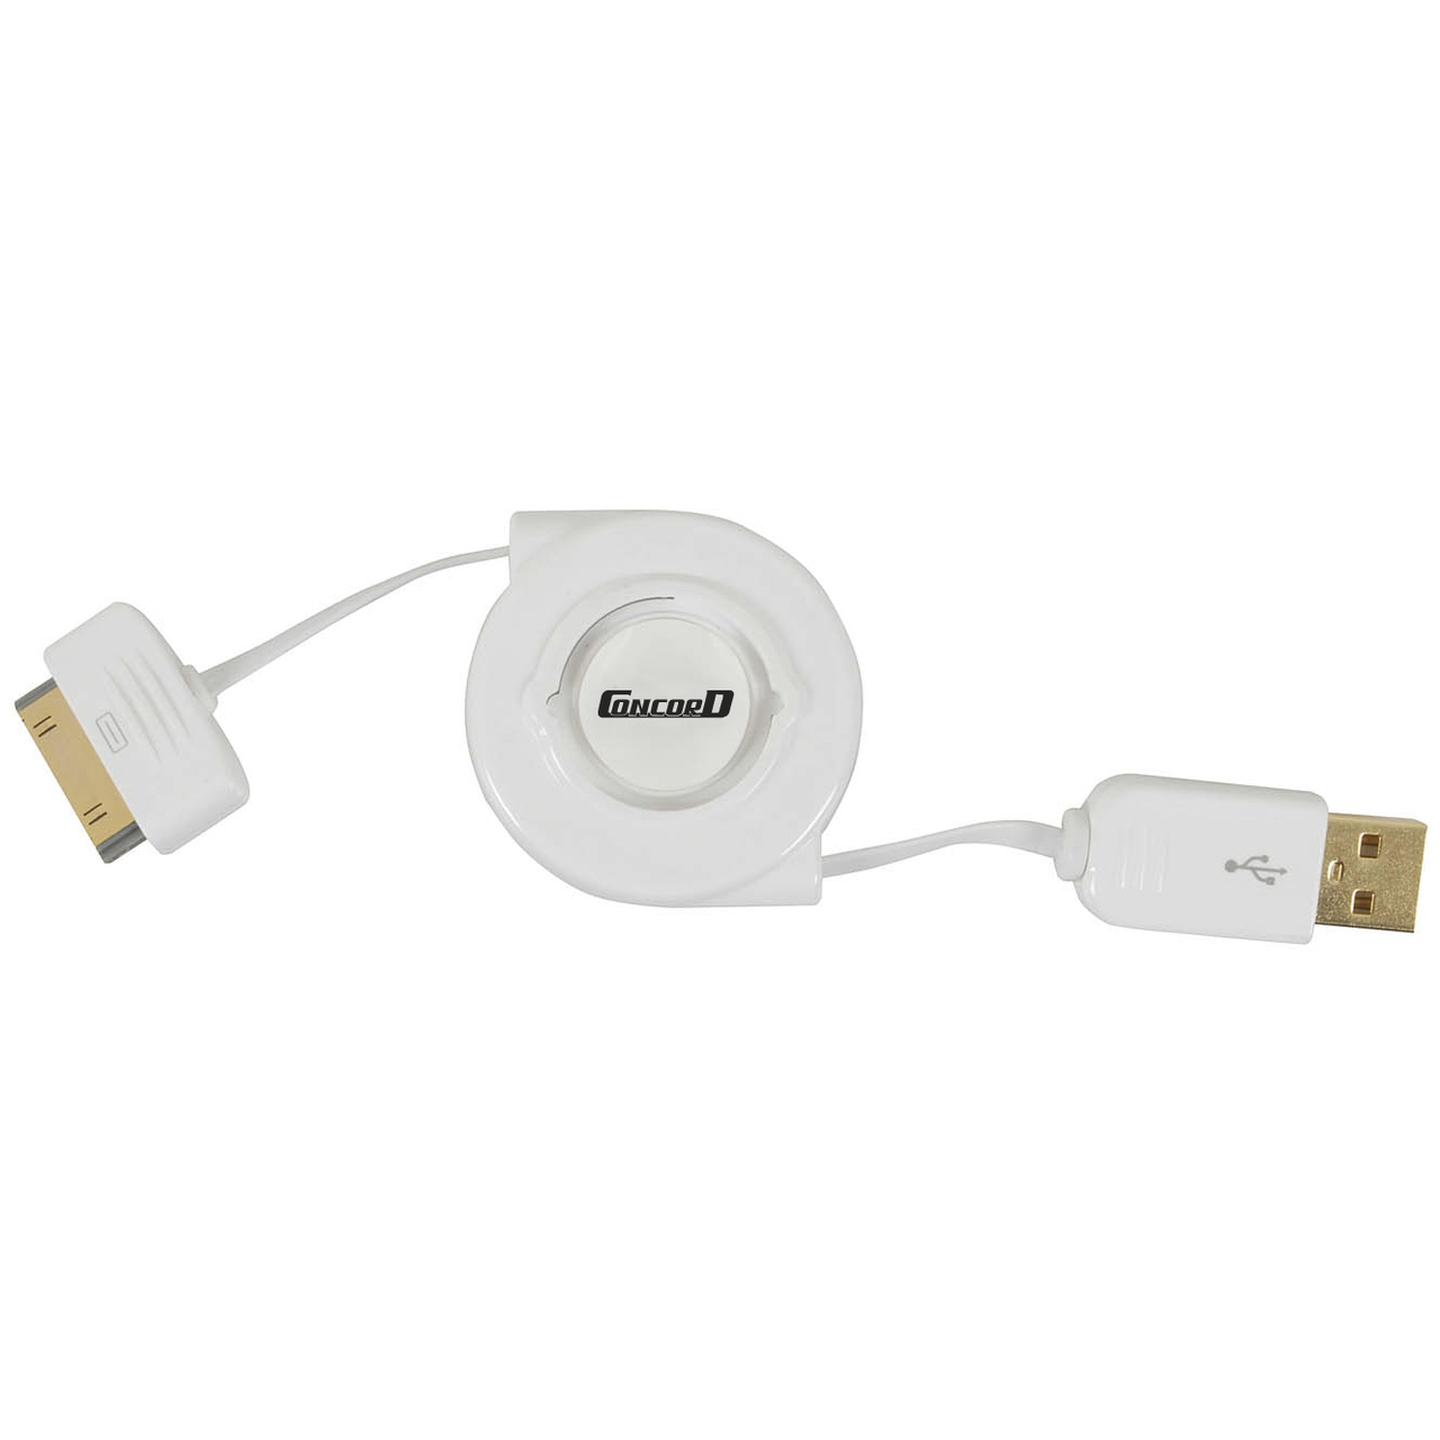 Retractable Lead iPhone/iPad/iPod to USB A Socket White 1M